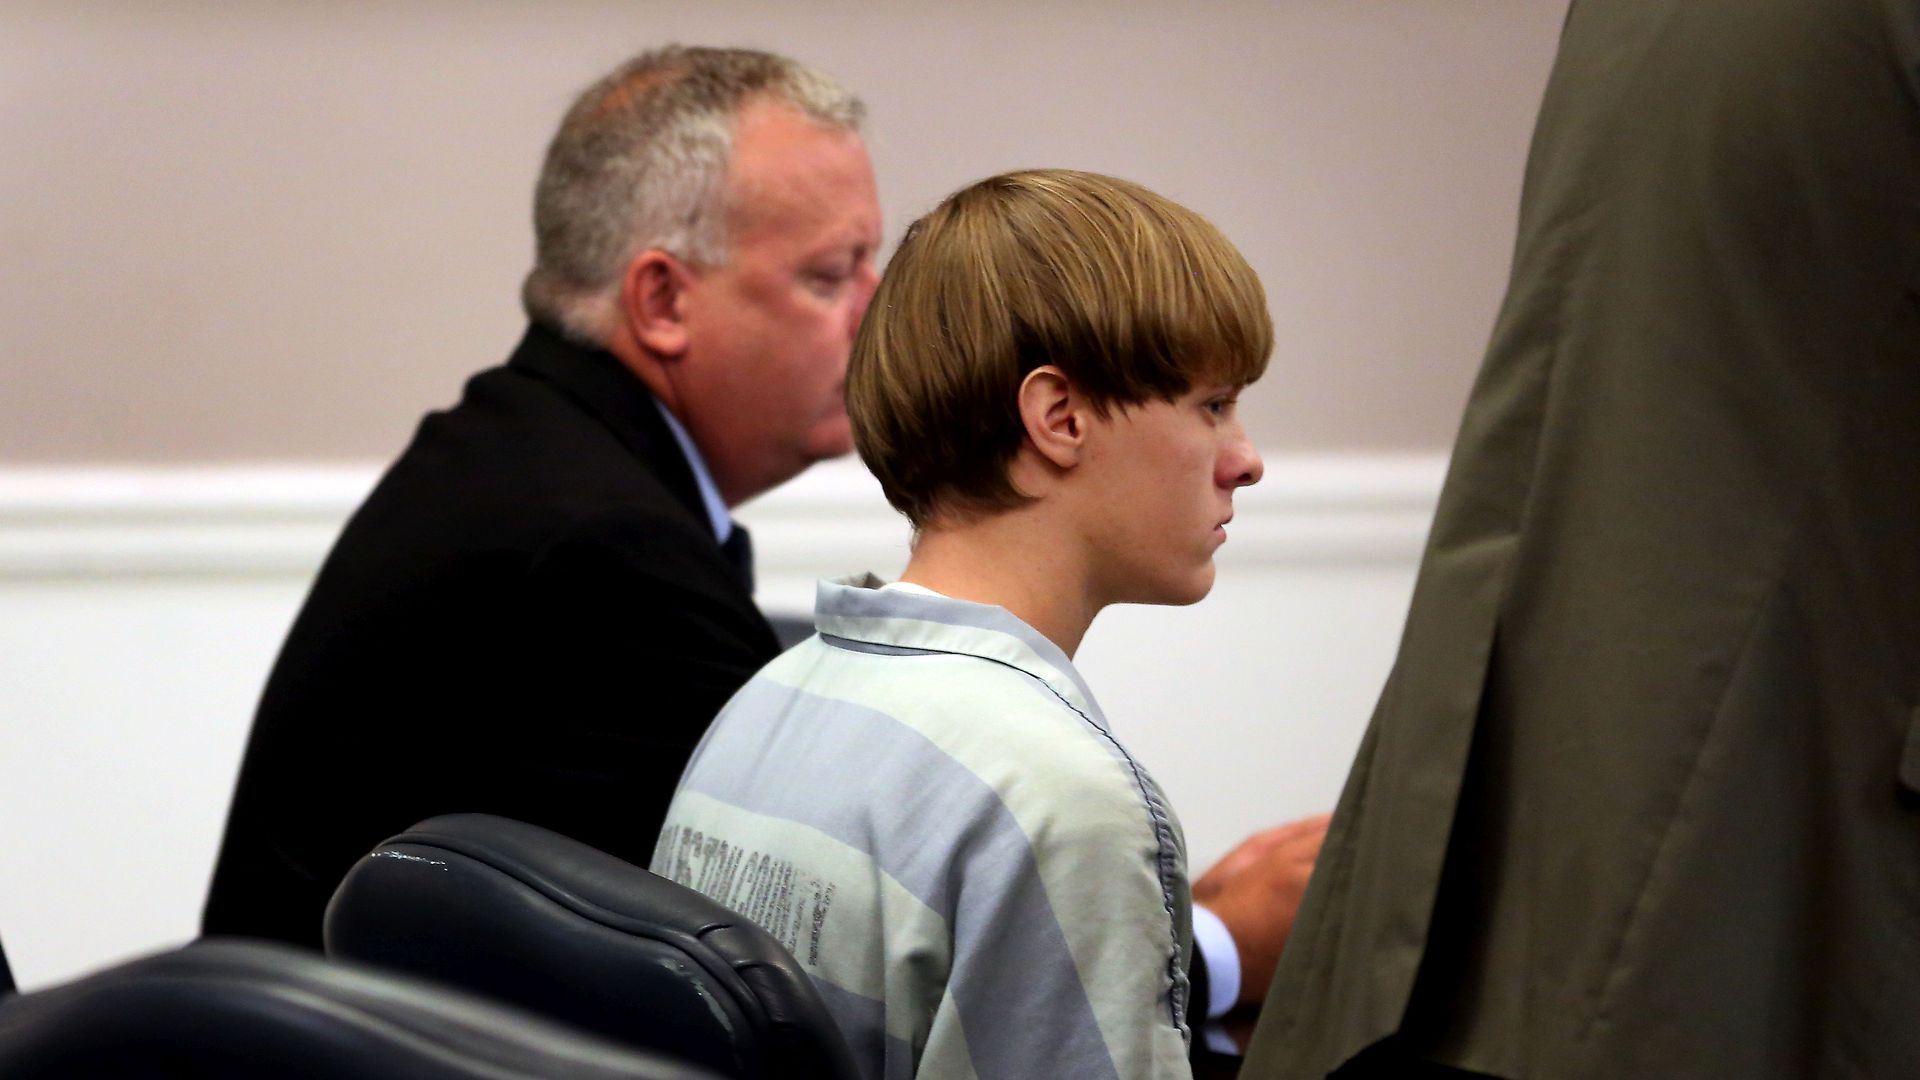 Dylann Roof appears in court on July 18, 2015, in Charleston, South Carolina.